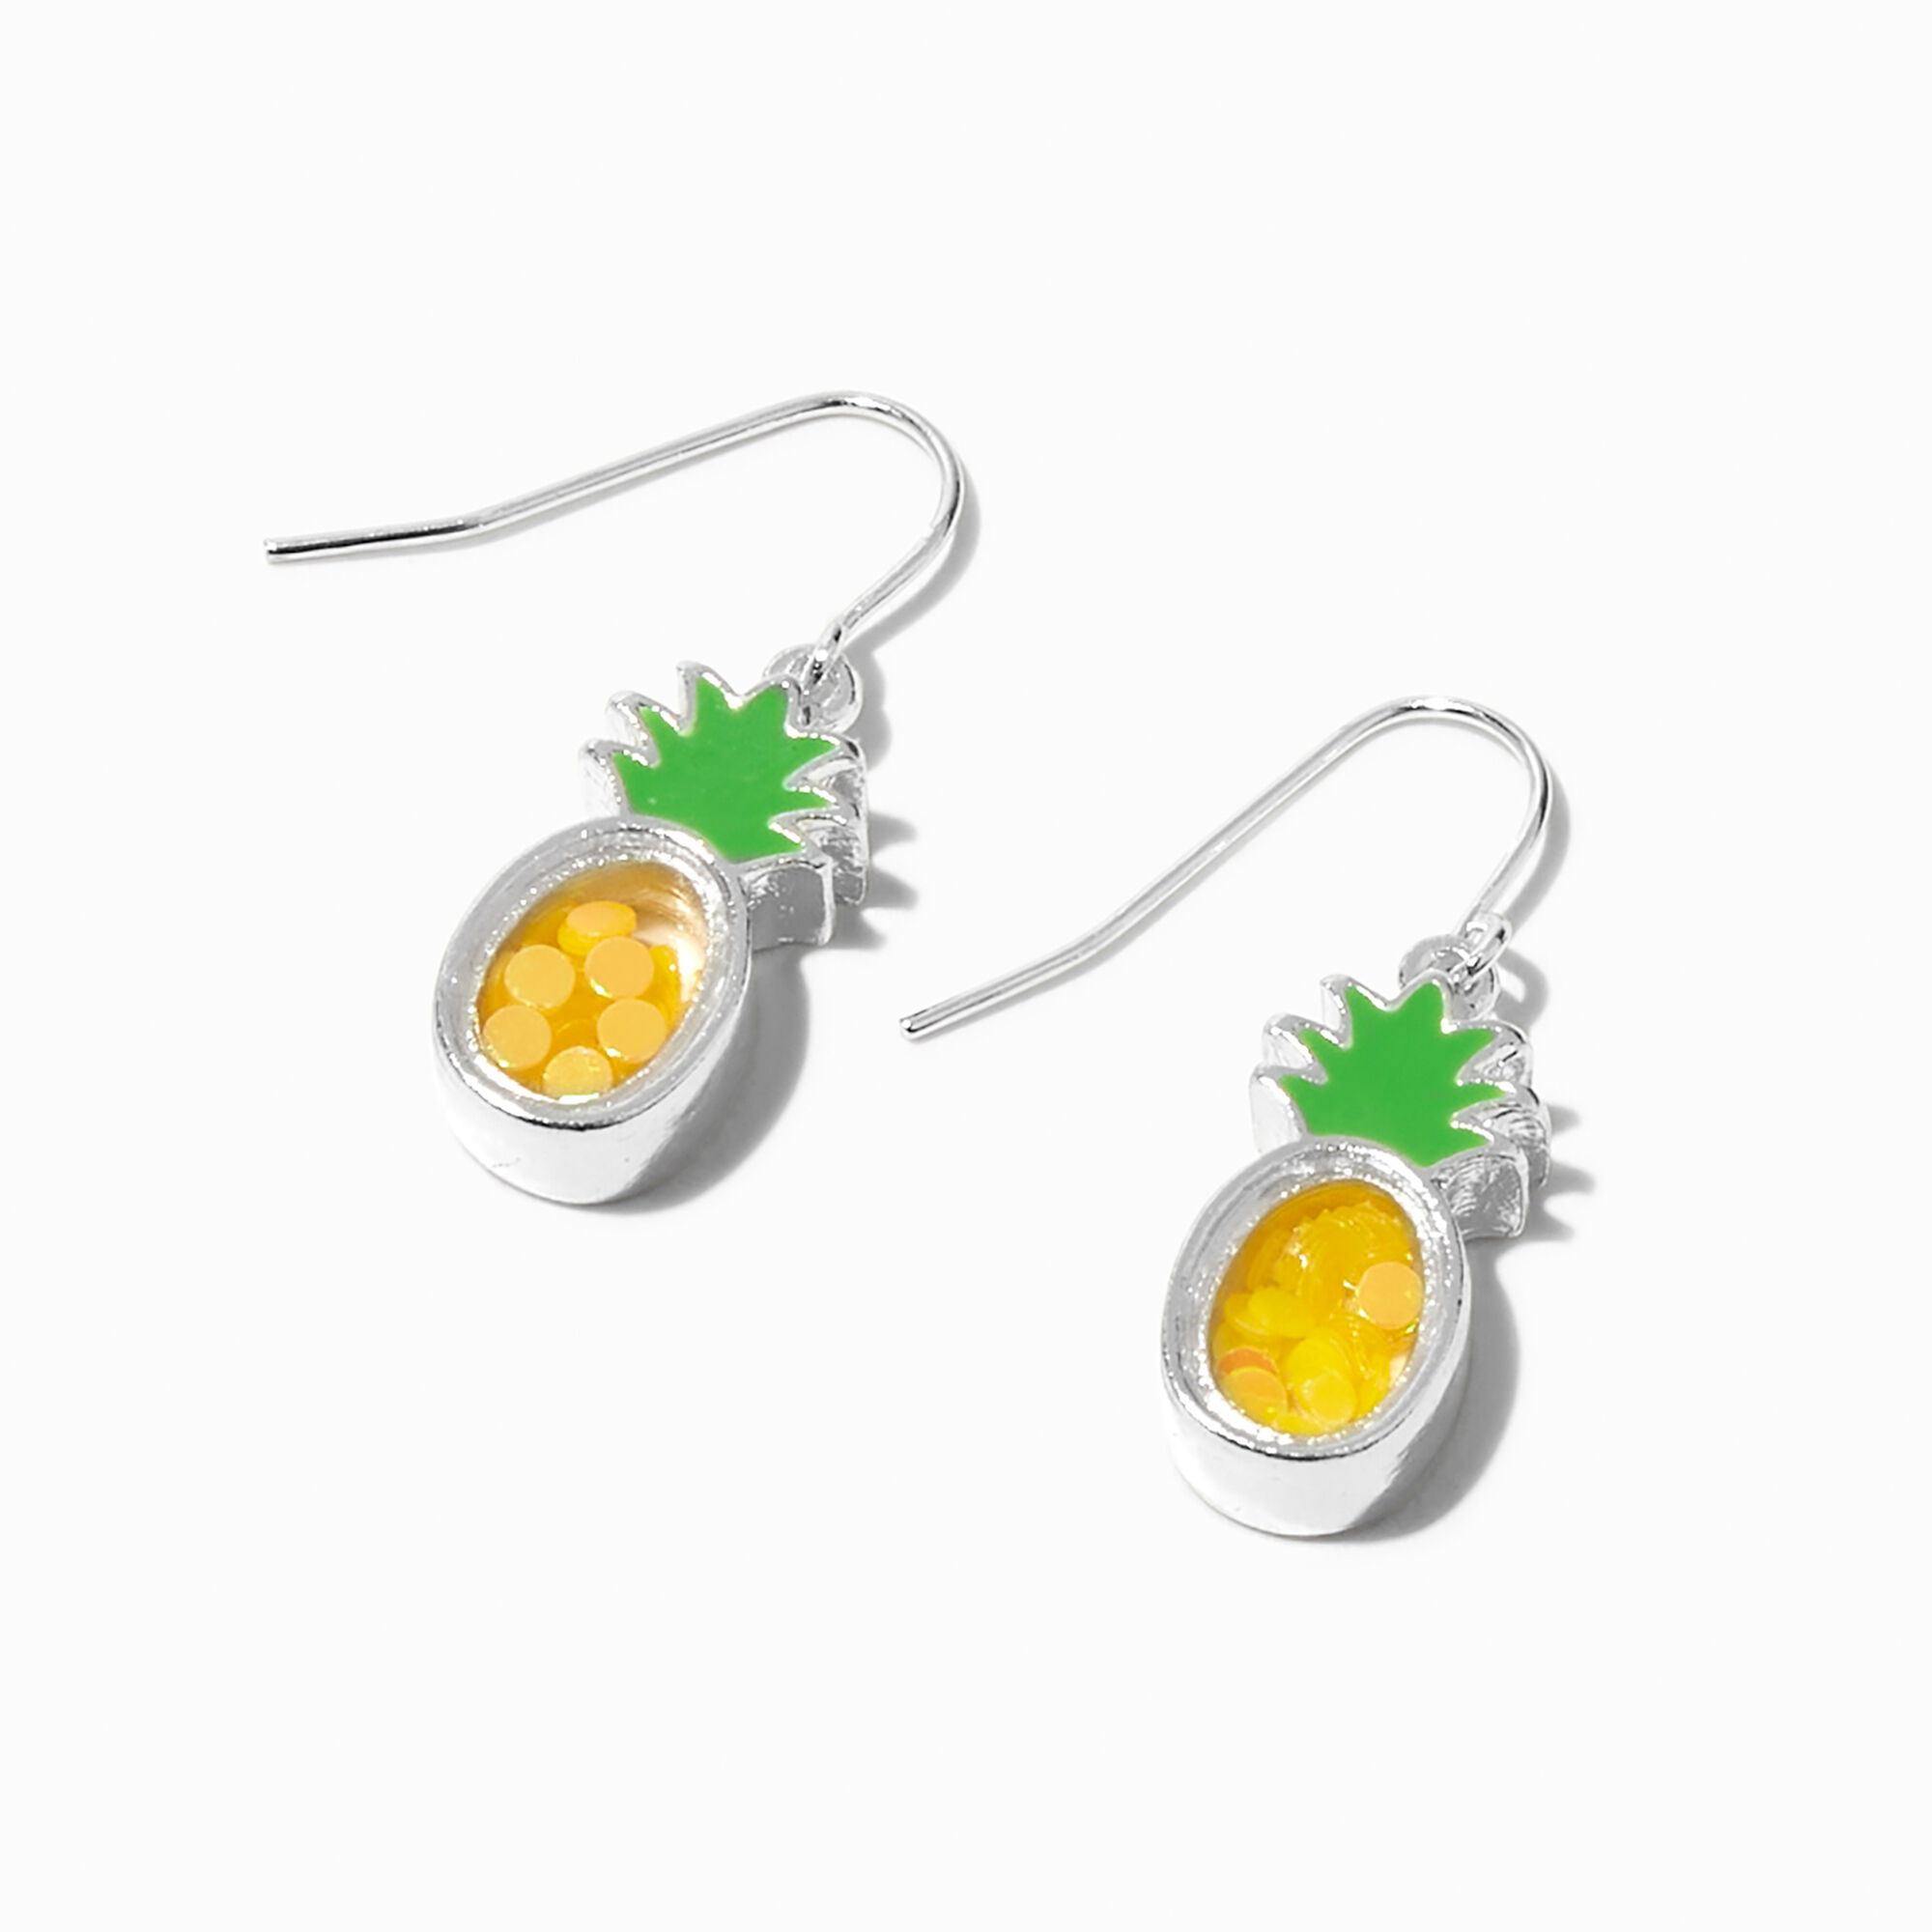 View Claires Pineapple Shaker 05 Drop Earrings Yellow information